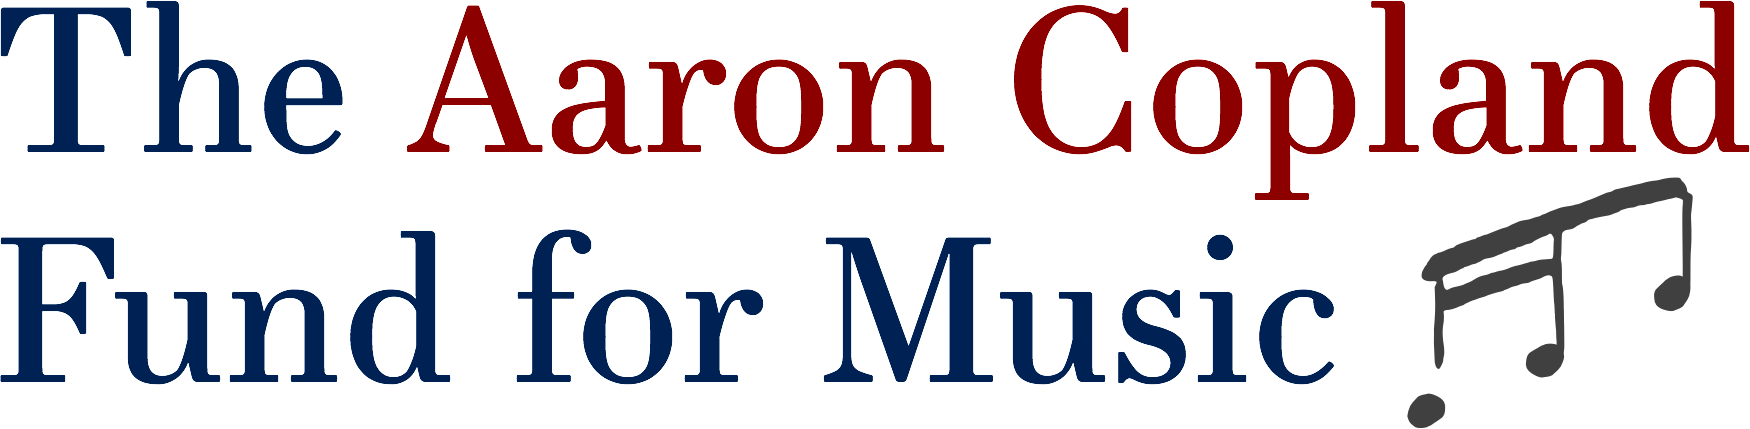 The Aaron Copland Fund for Music logo